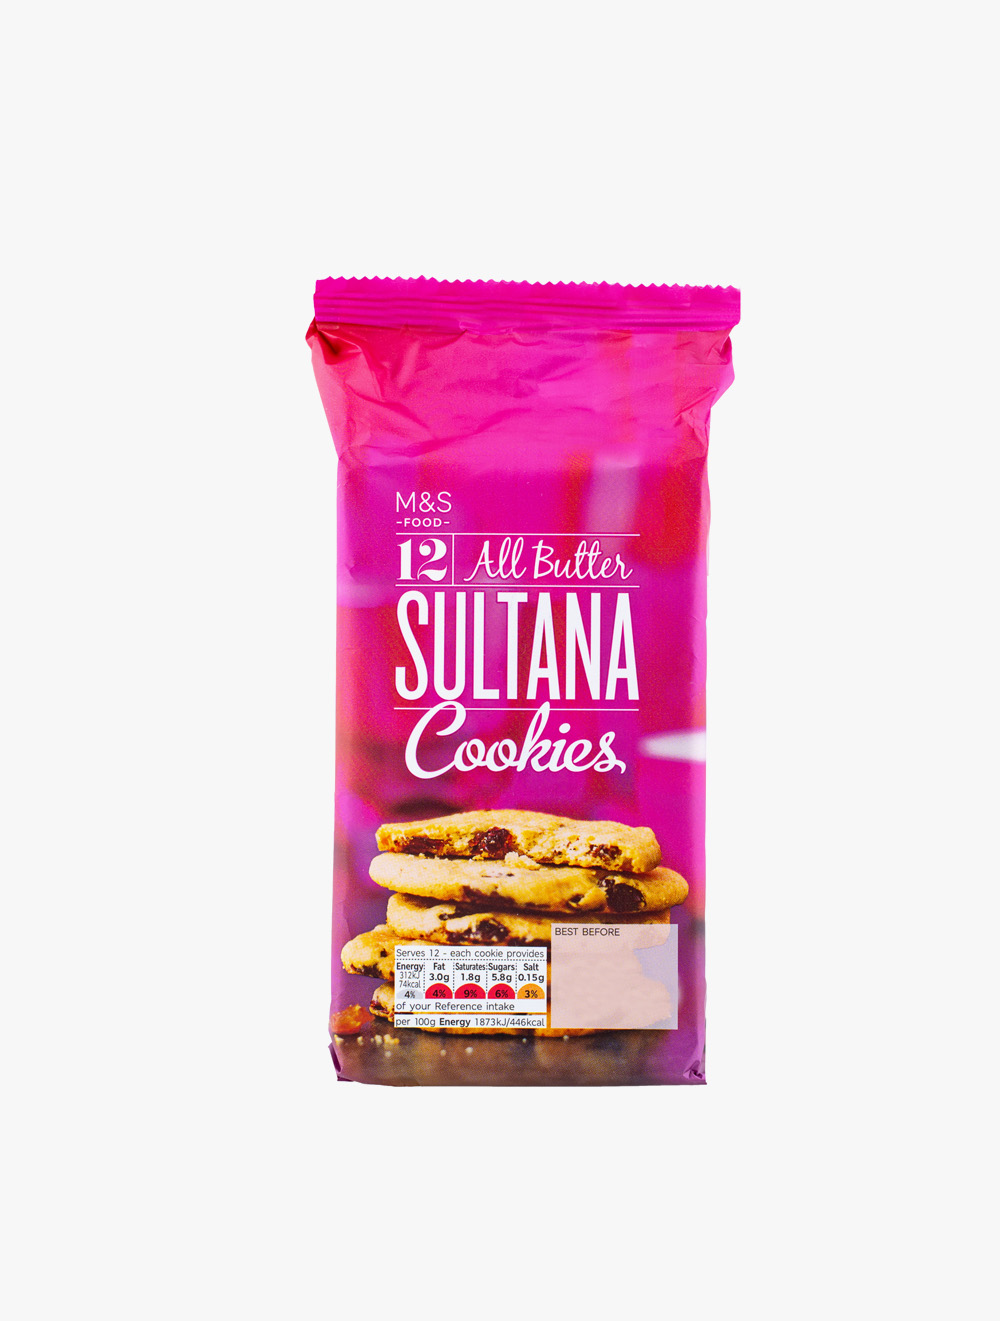 All Butter Sultana Cookies